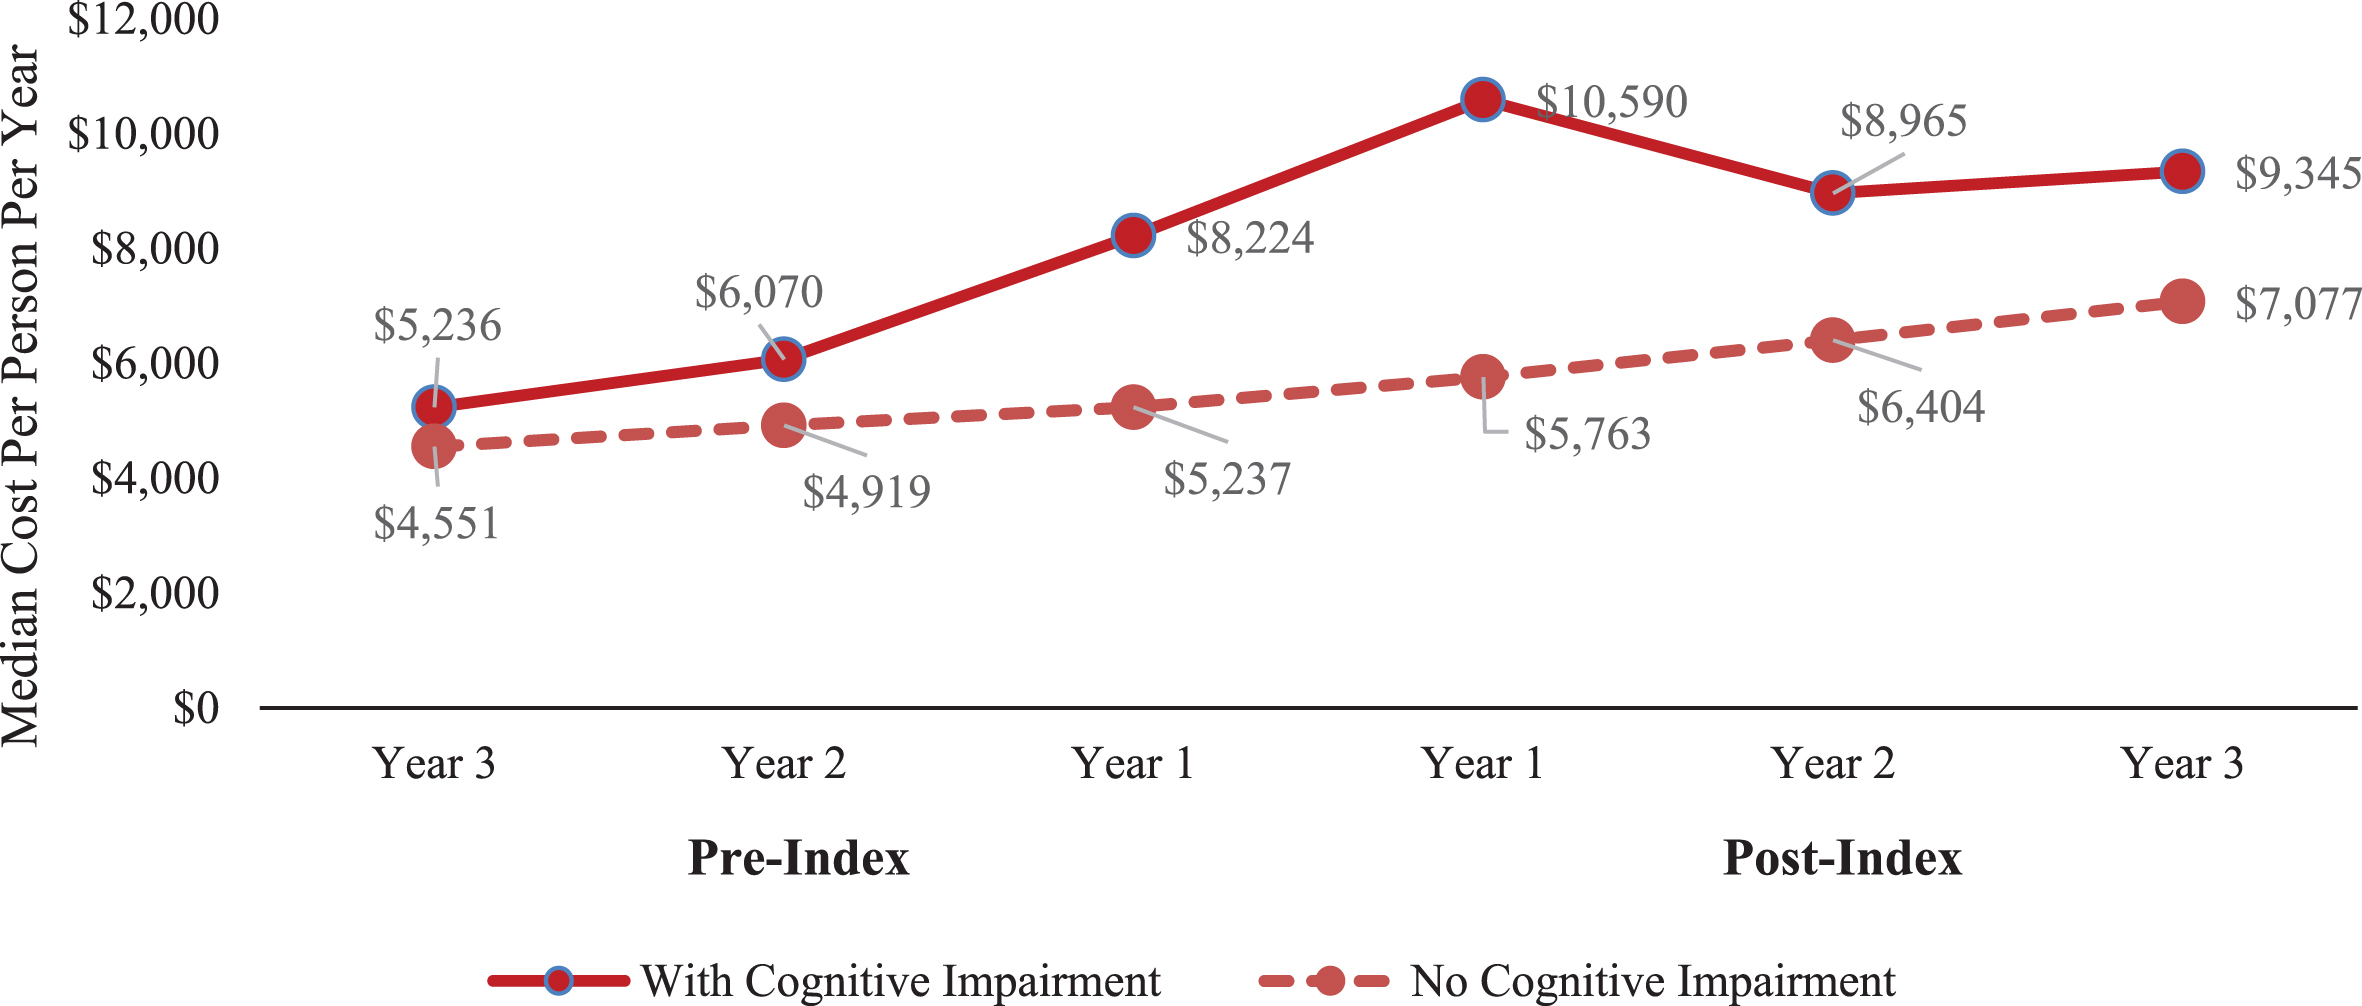 Median Total Costs for Each Cohort Prior to and Following Cognitive Impairment Diagnosis. Note: In 2019 dollars.